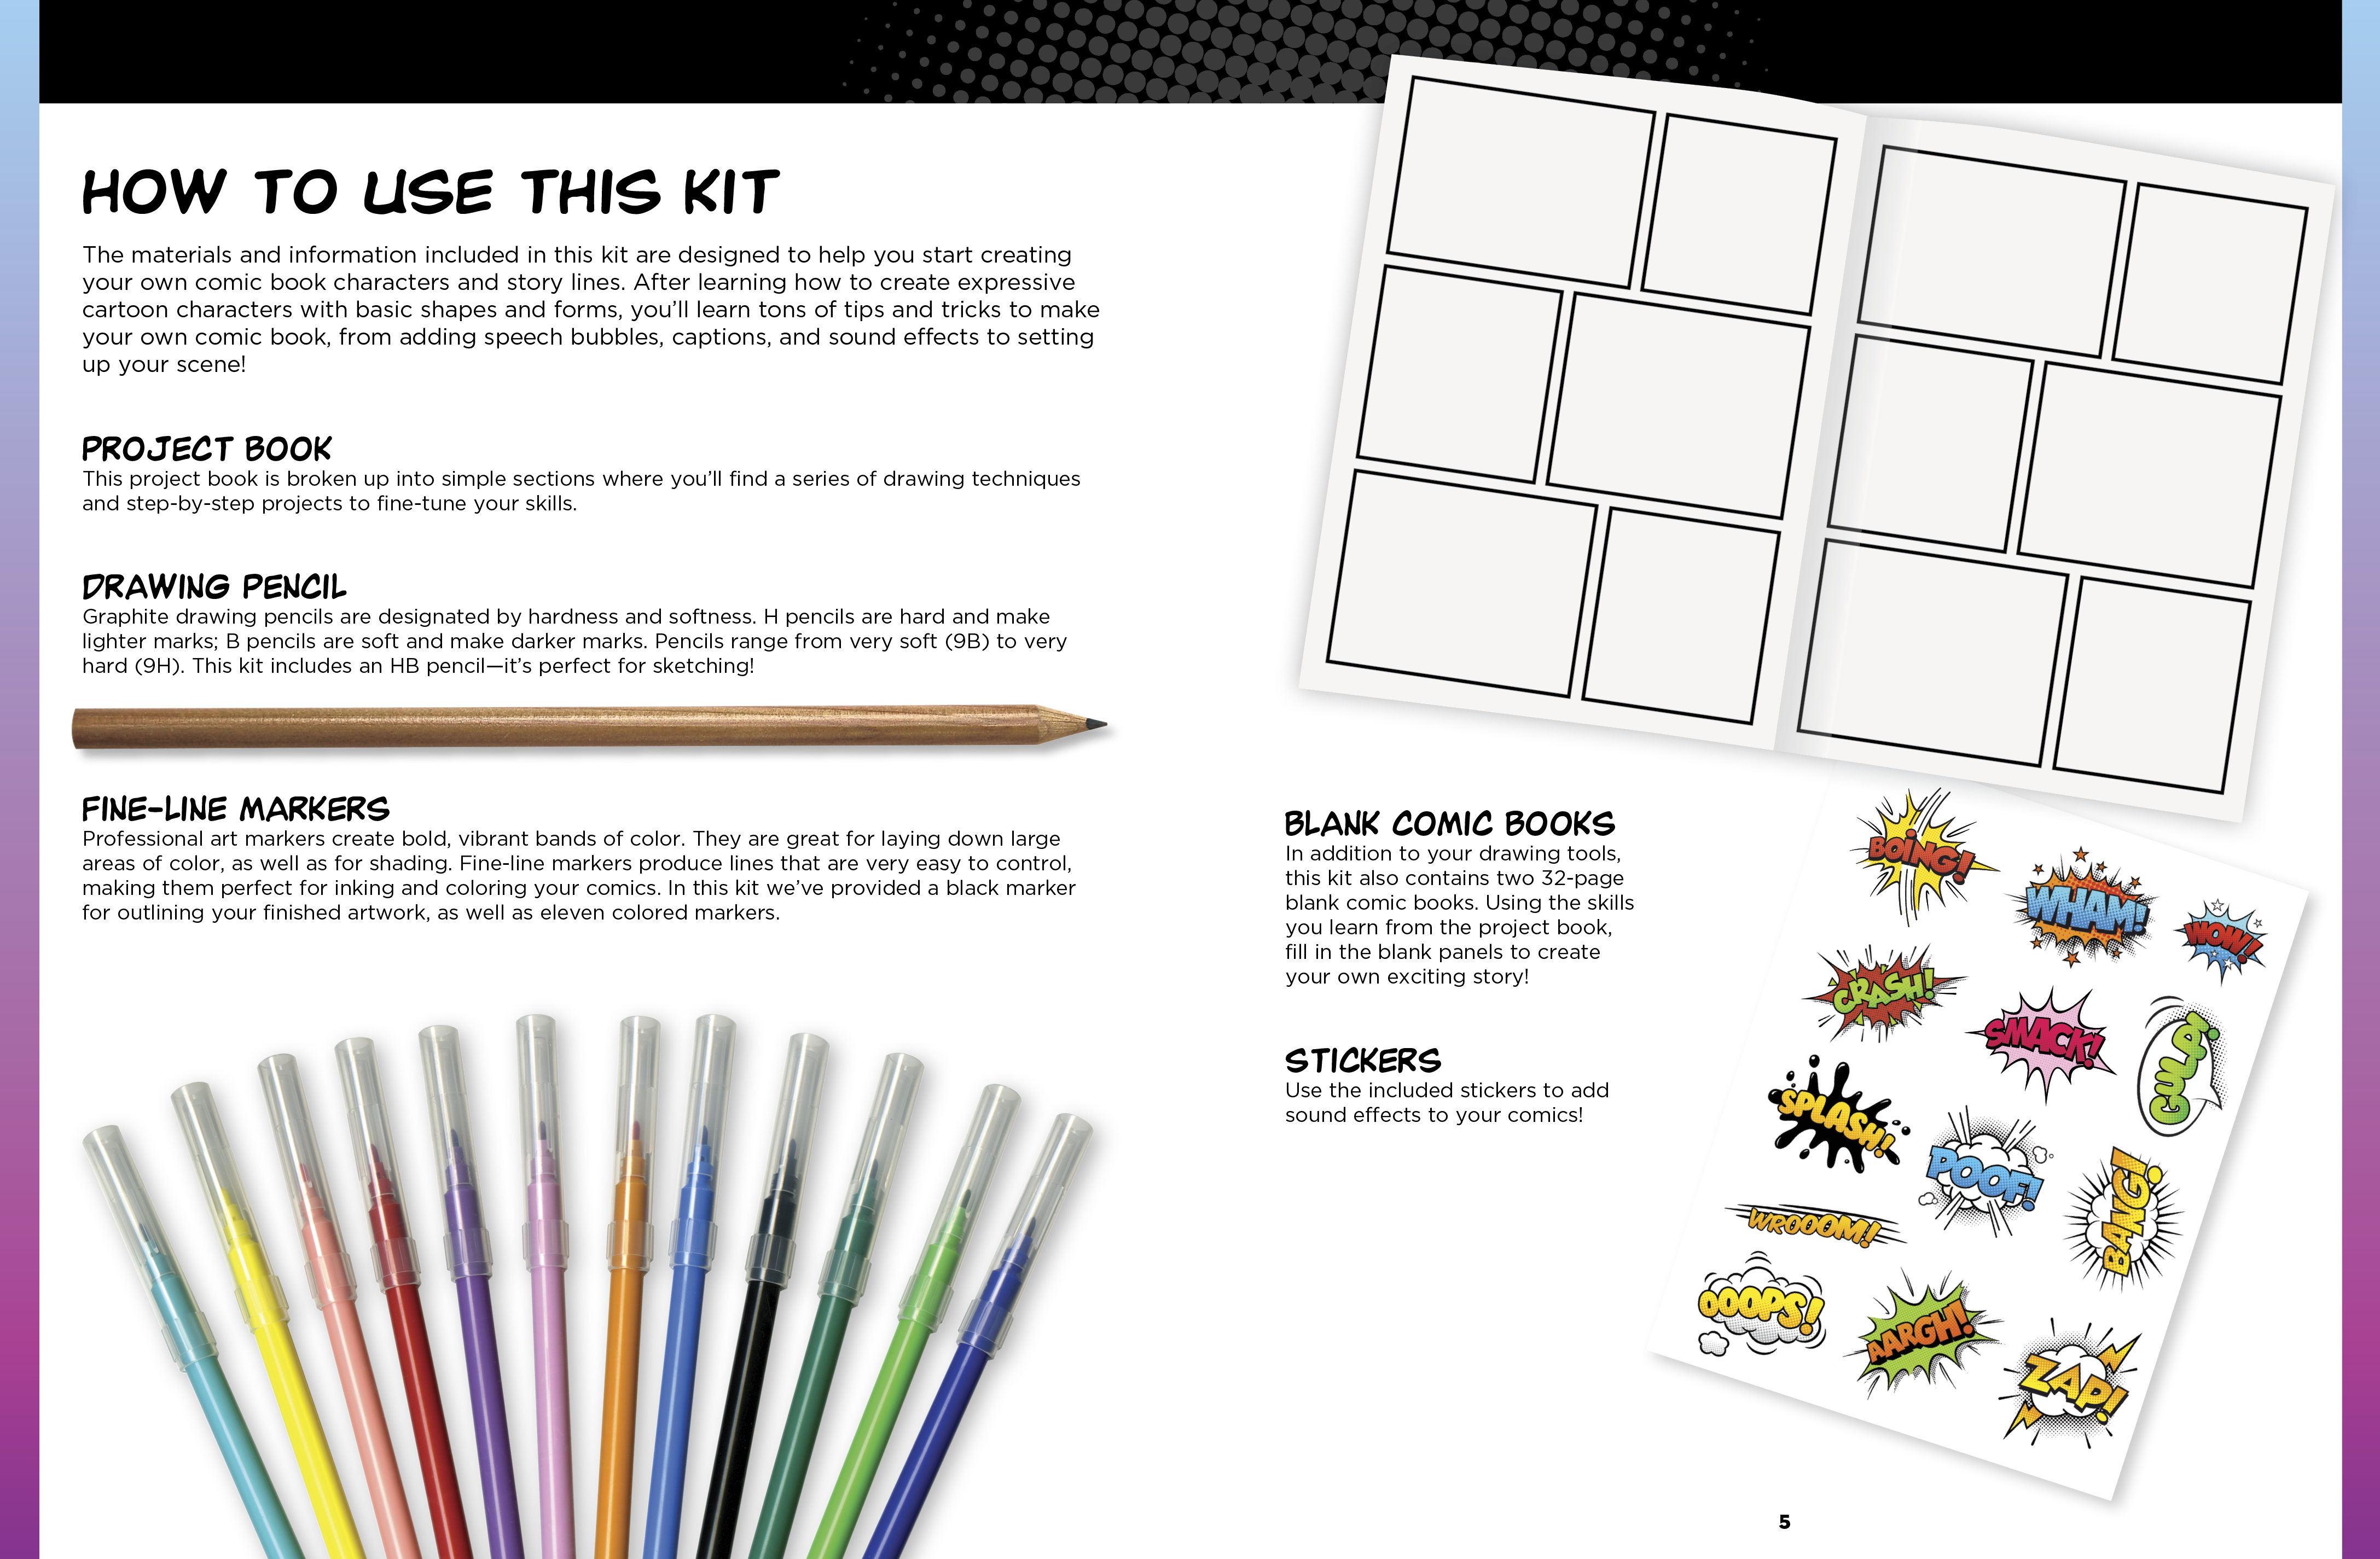 The Art of Drawing Comic Books Kit by Bob Berry, Jim Campbell